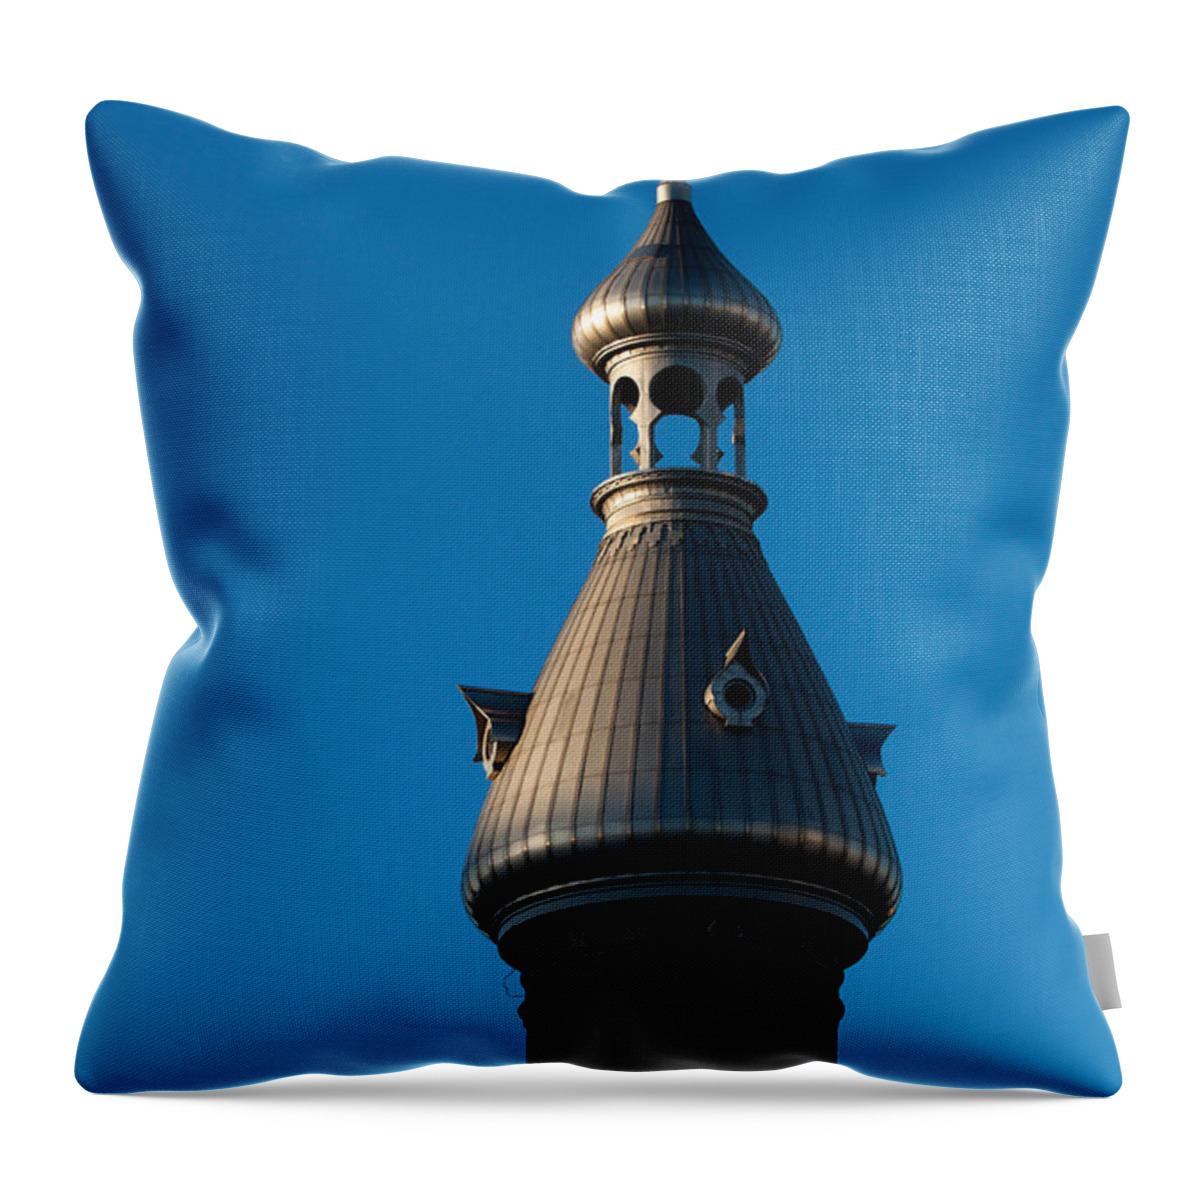 Architecture Throw Pillow featuring the photograph Tampa Bay Hotel Minaret by Ed Gleichman